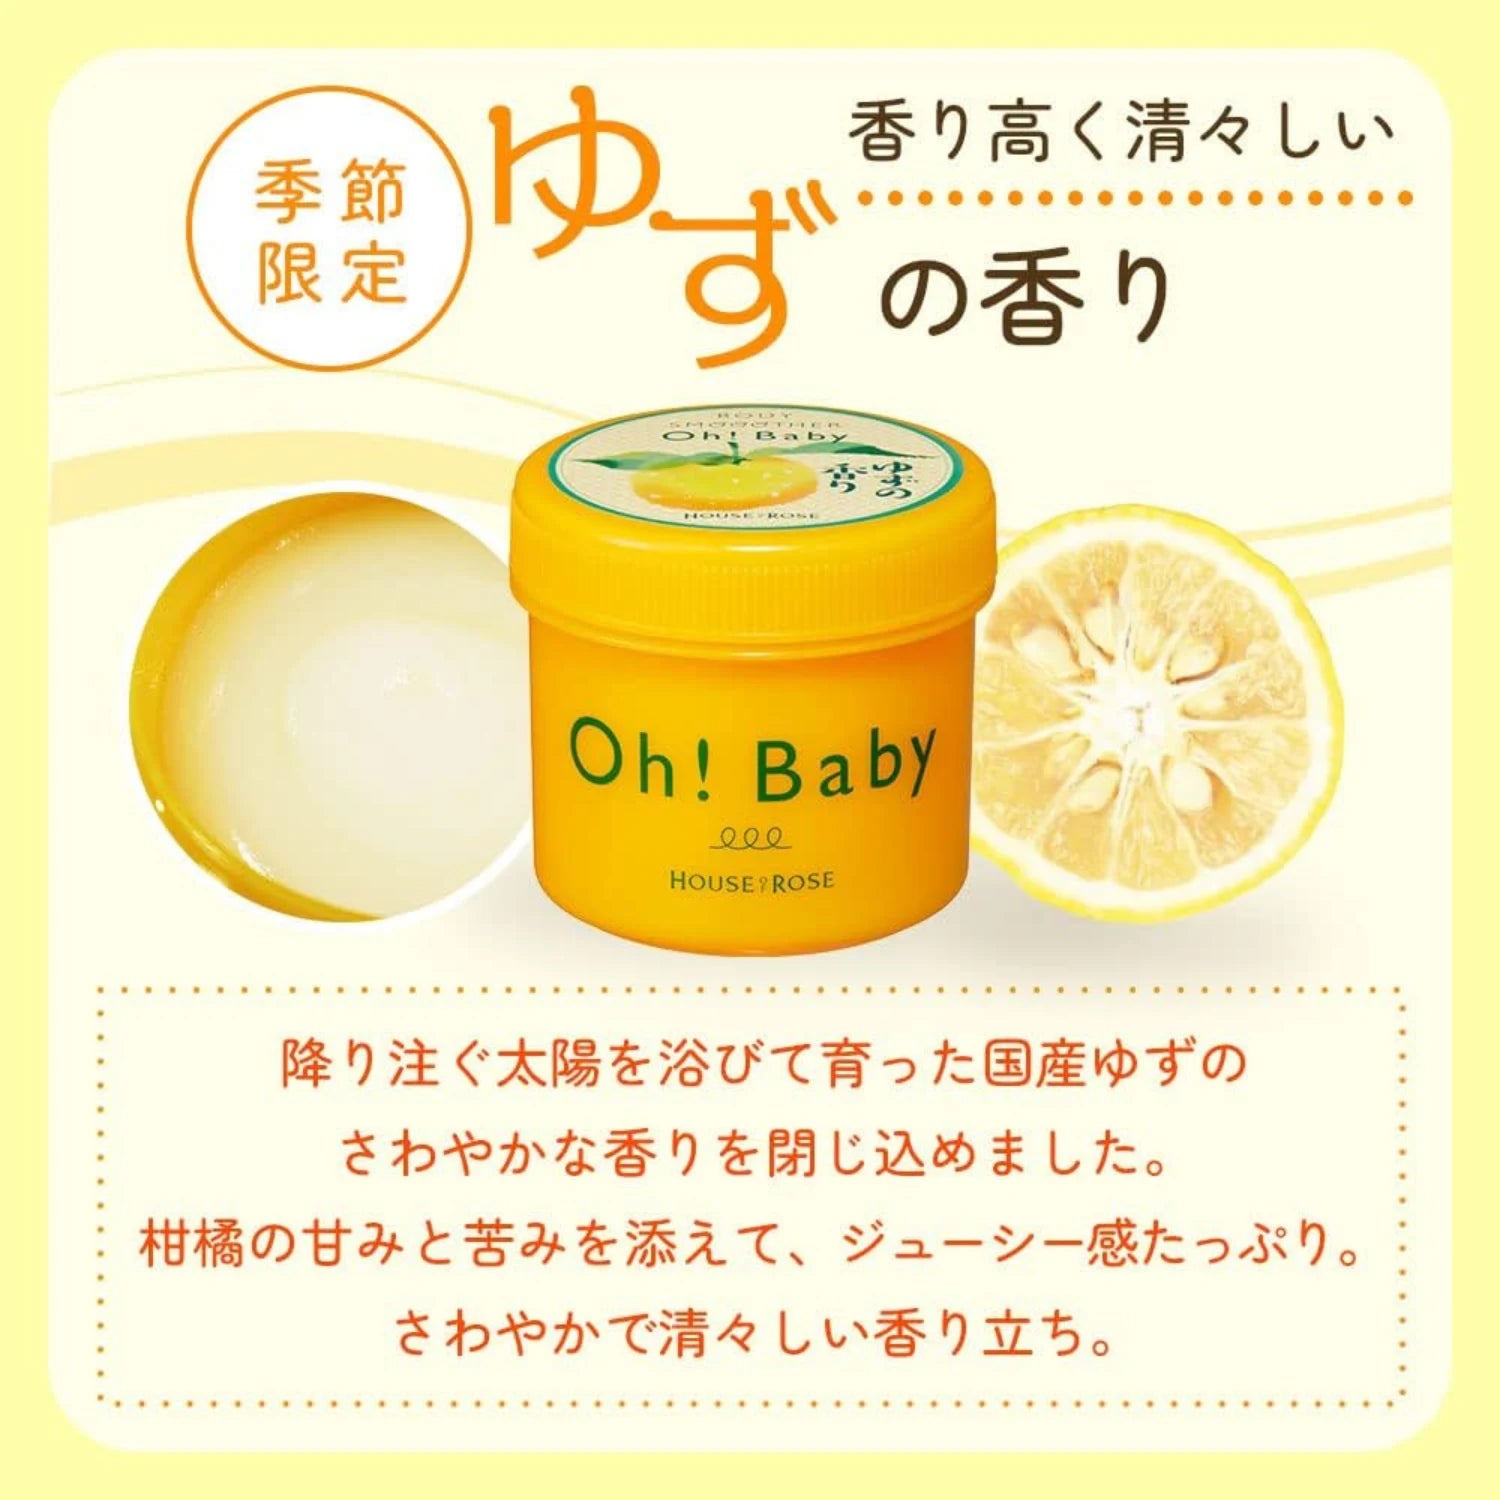 House Of Rose Oh! Baby Body Scrub Smoother Cream Yuzu 200g - Buy Me Japan